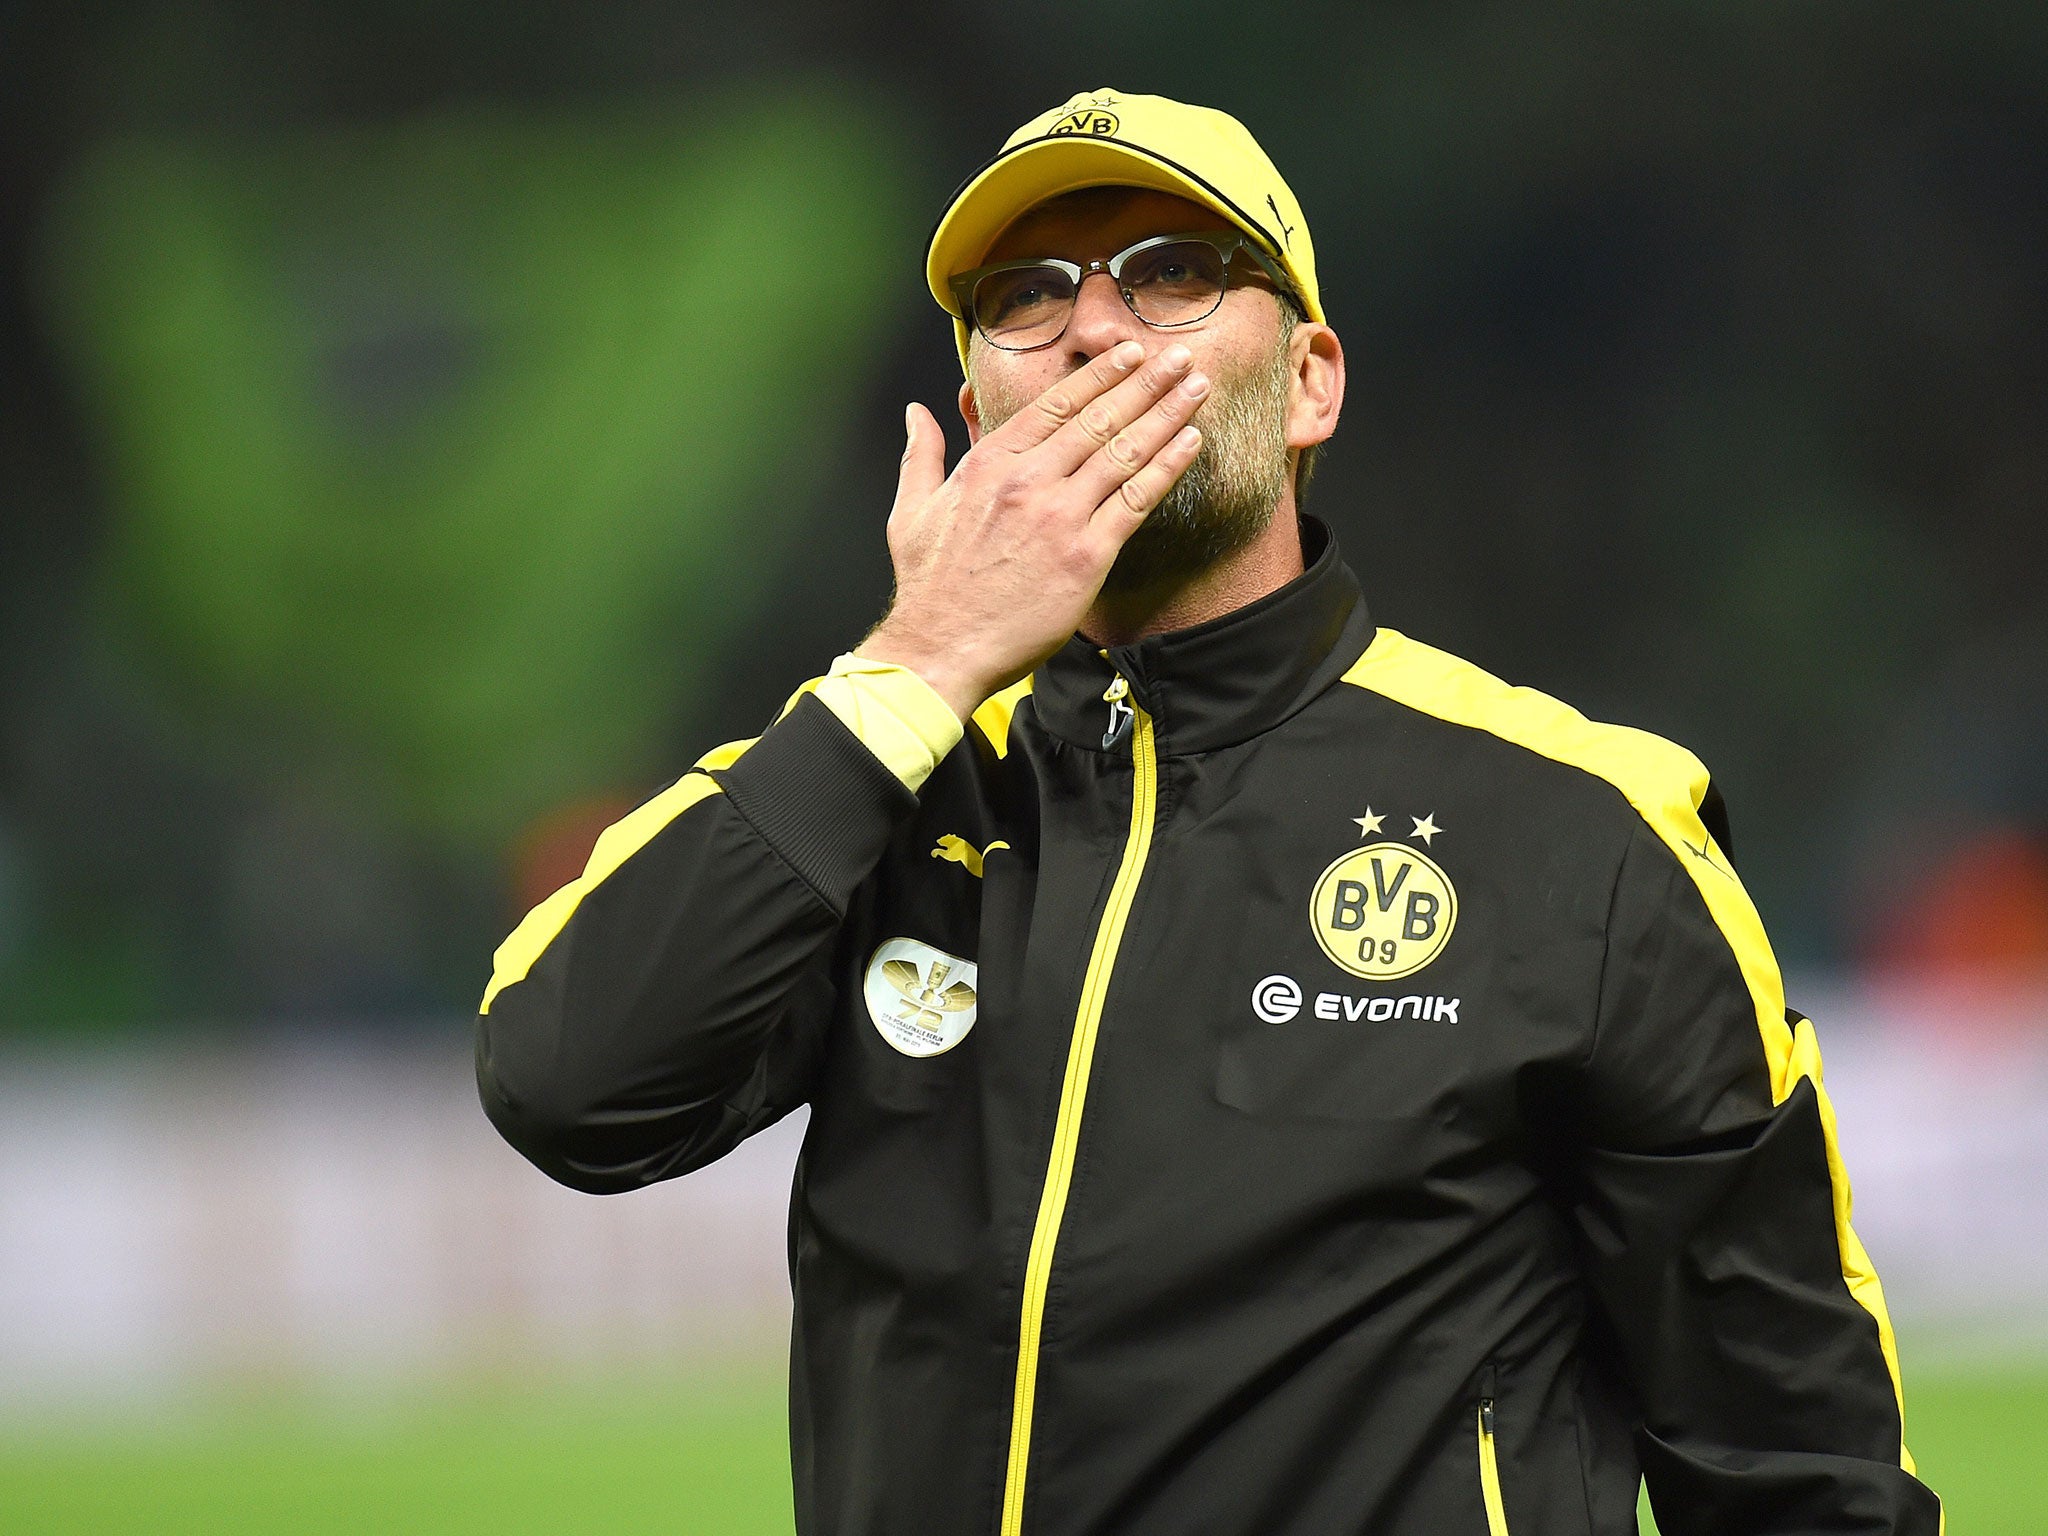 Jurgen Klopp has been without a club since leaving Borussia Dortmund at the end of last season